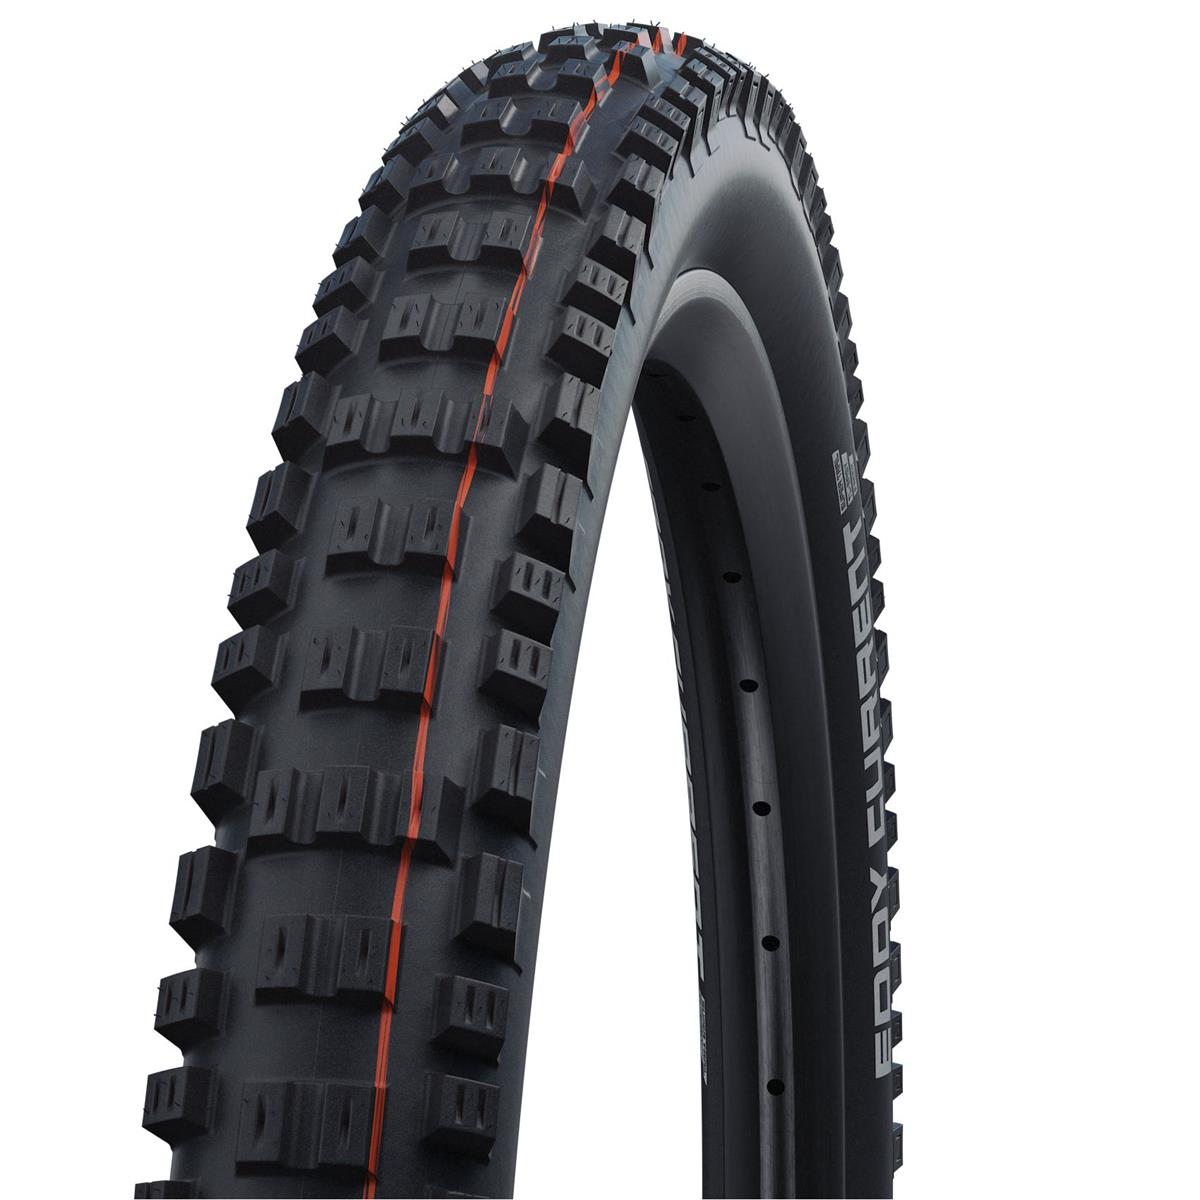 Schwalbe MTB Tire Eddy Current Front HS 496 Black, 29 x 2.6 Inches, SnakeSkin, Super Trail, Tubeless Easy, Addix Soft, Foldable